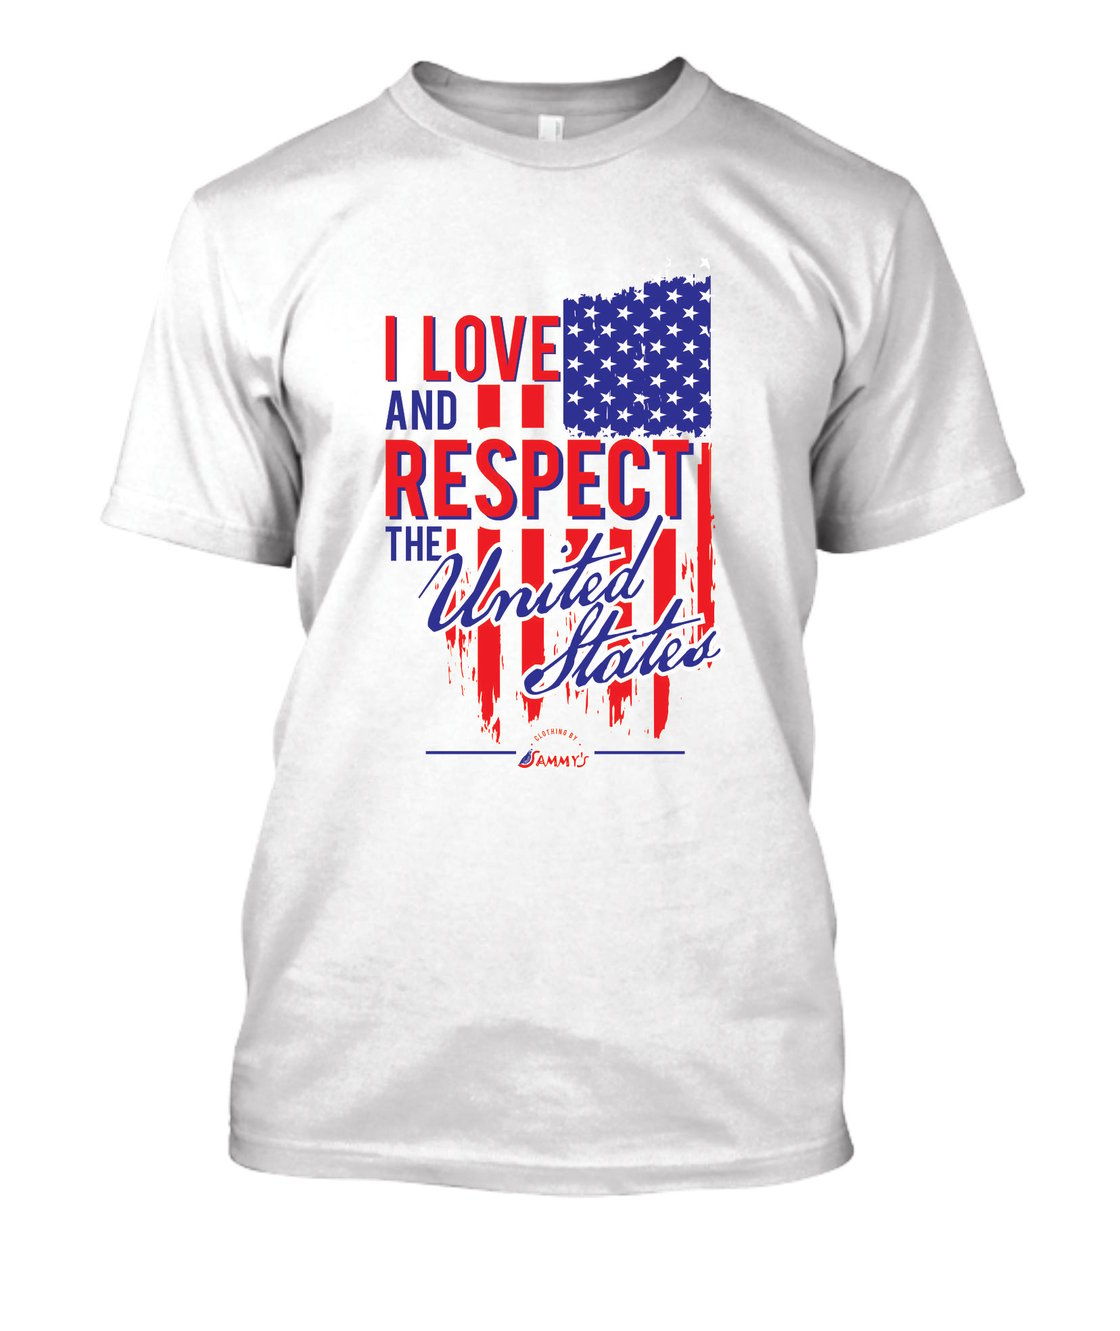 Image of Love and Respect Tee